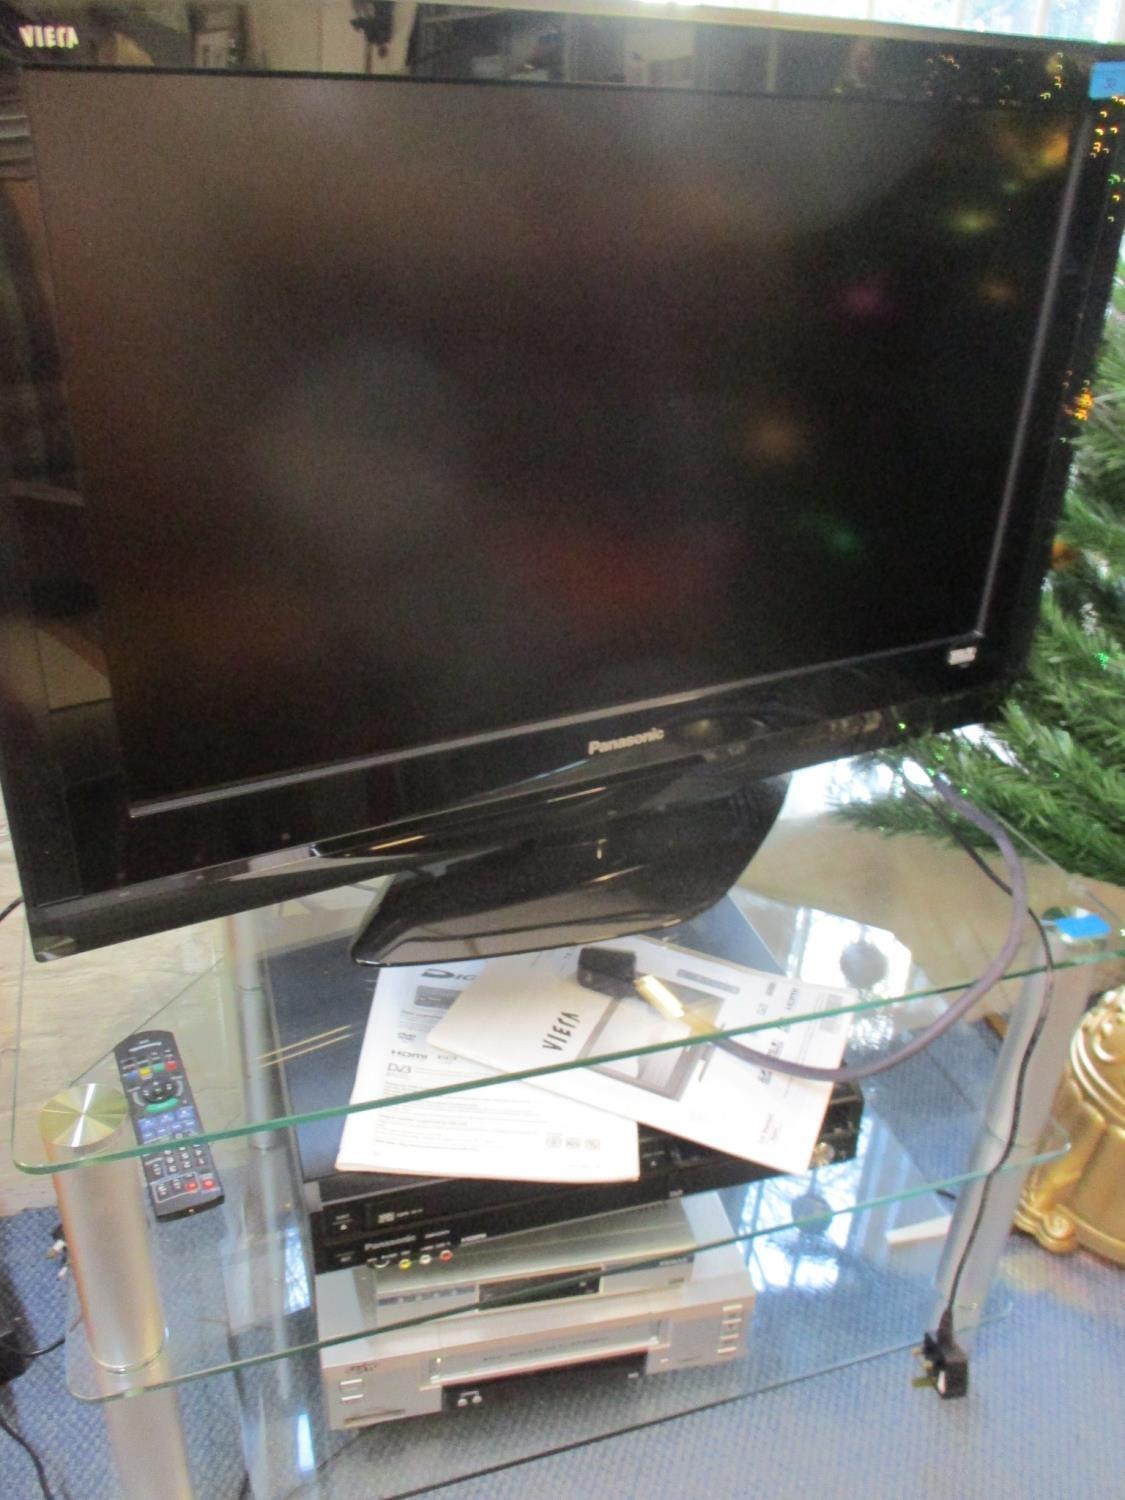 A Panasonic Viera flatscreen television, VHS cassette player and a Sanyo combination unit with